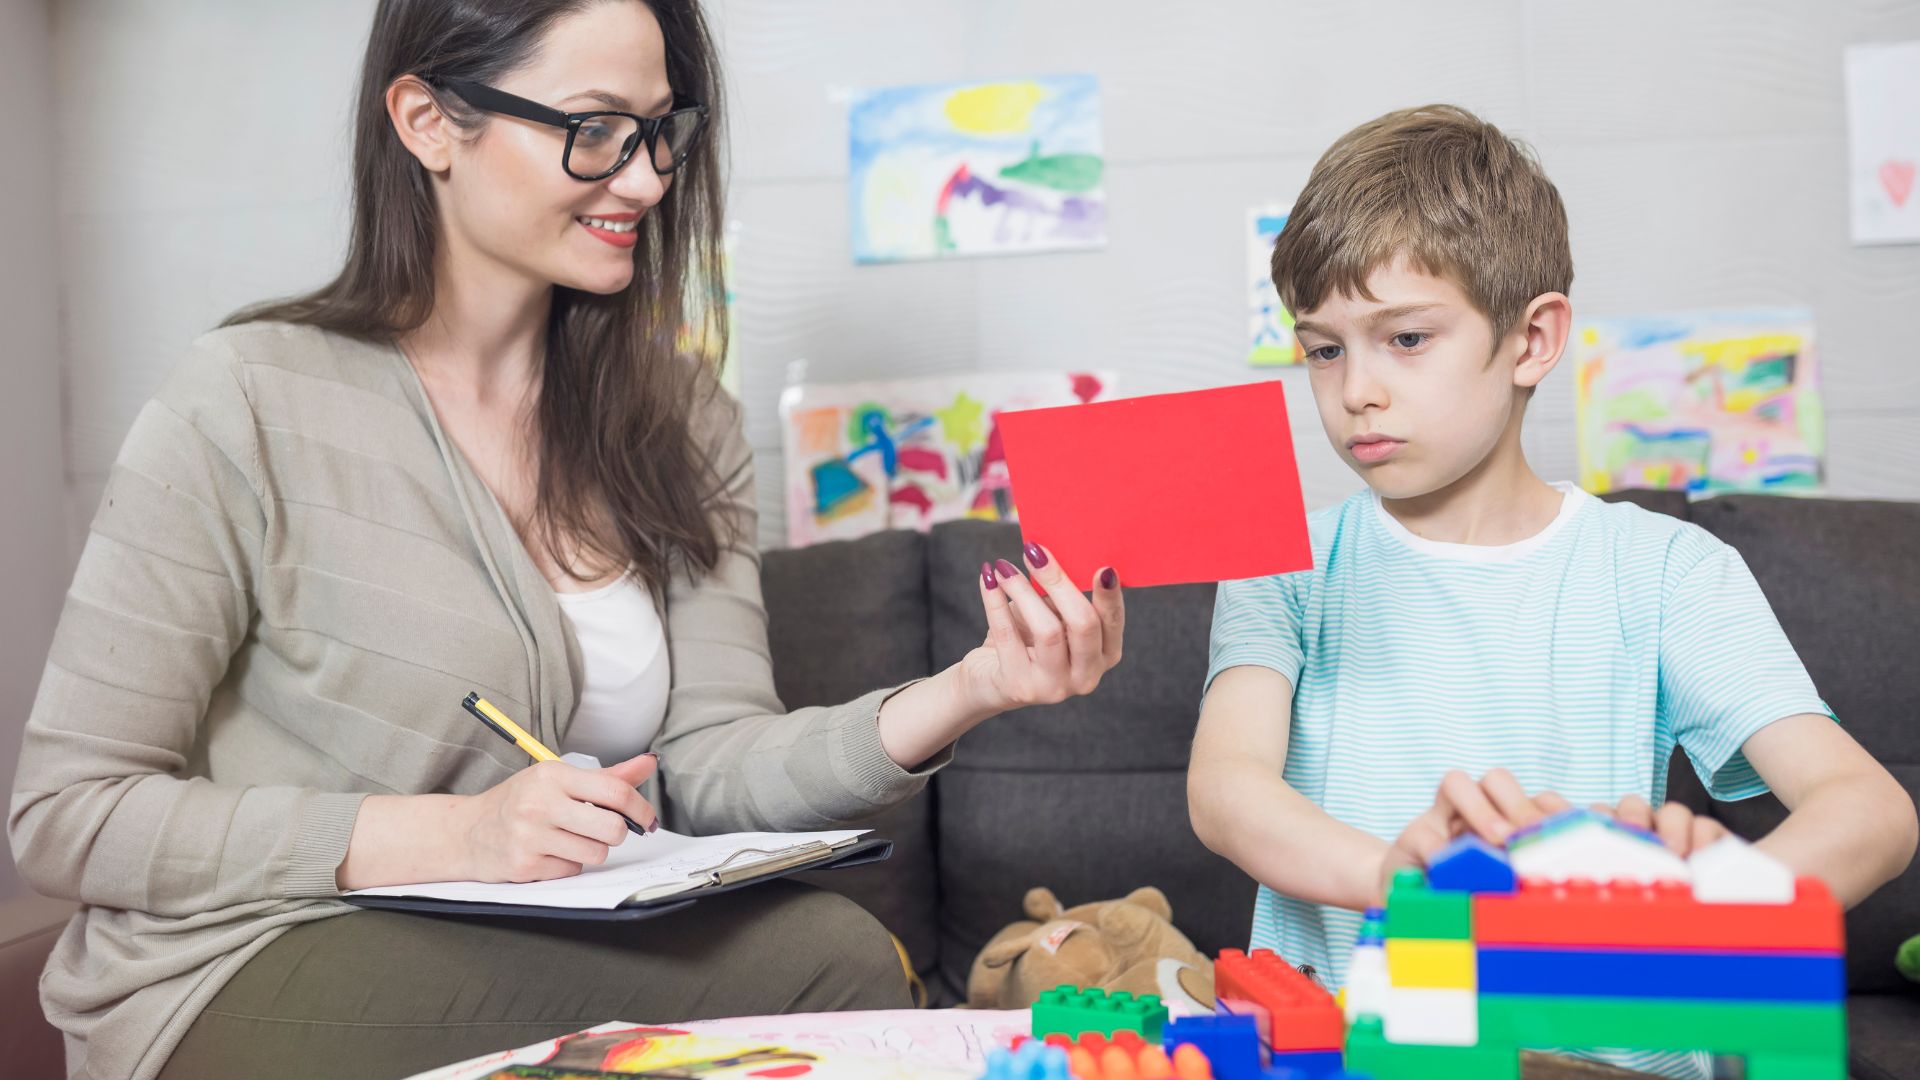 How To Qualify as an Educational Psychologist